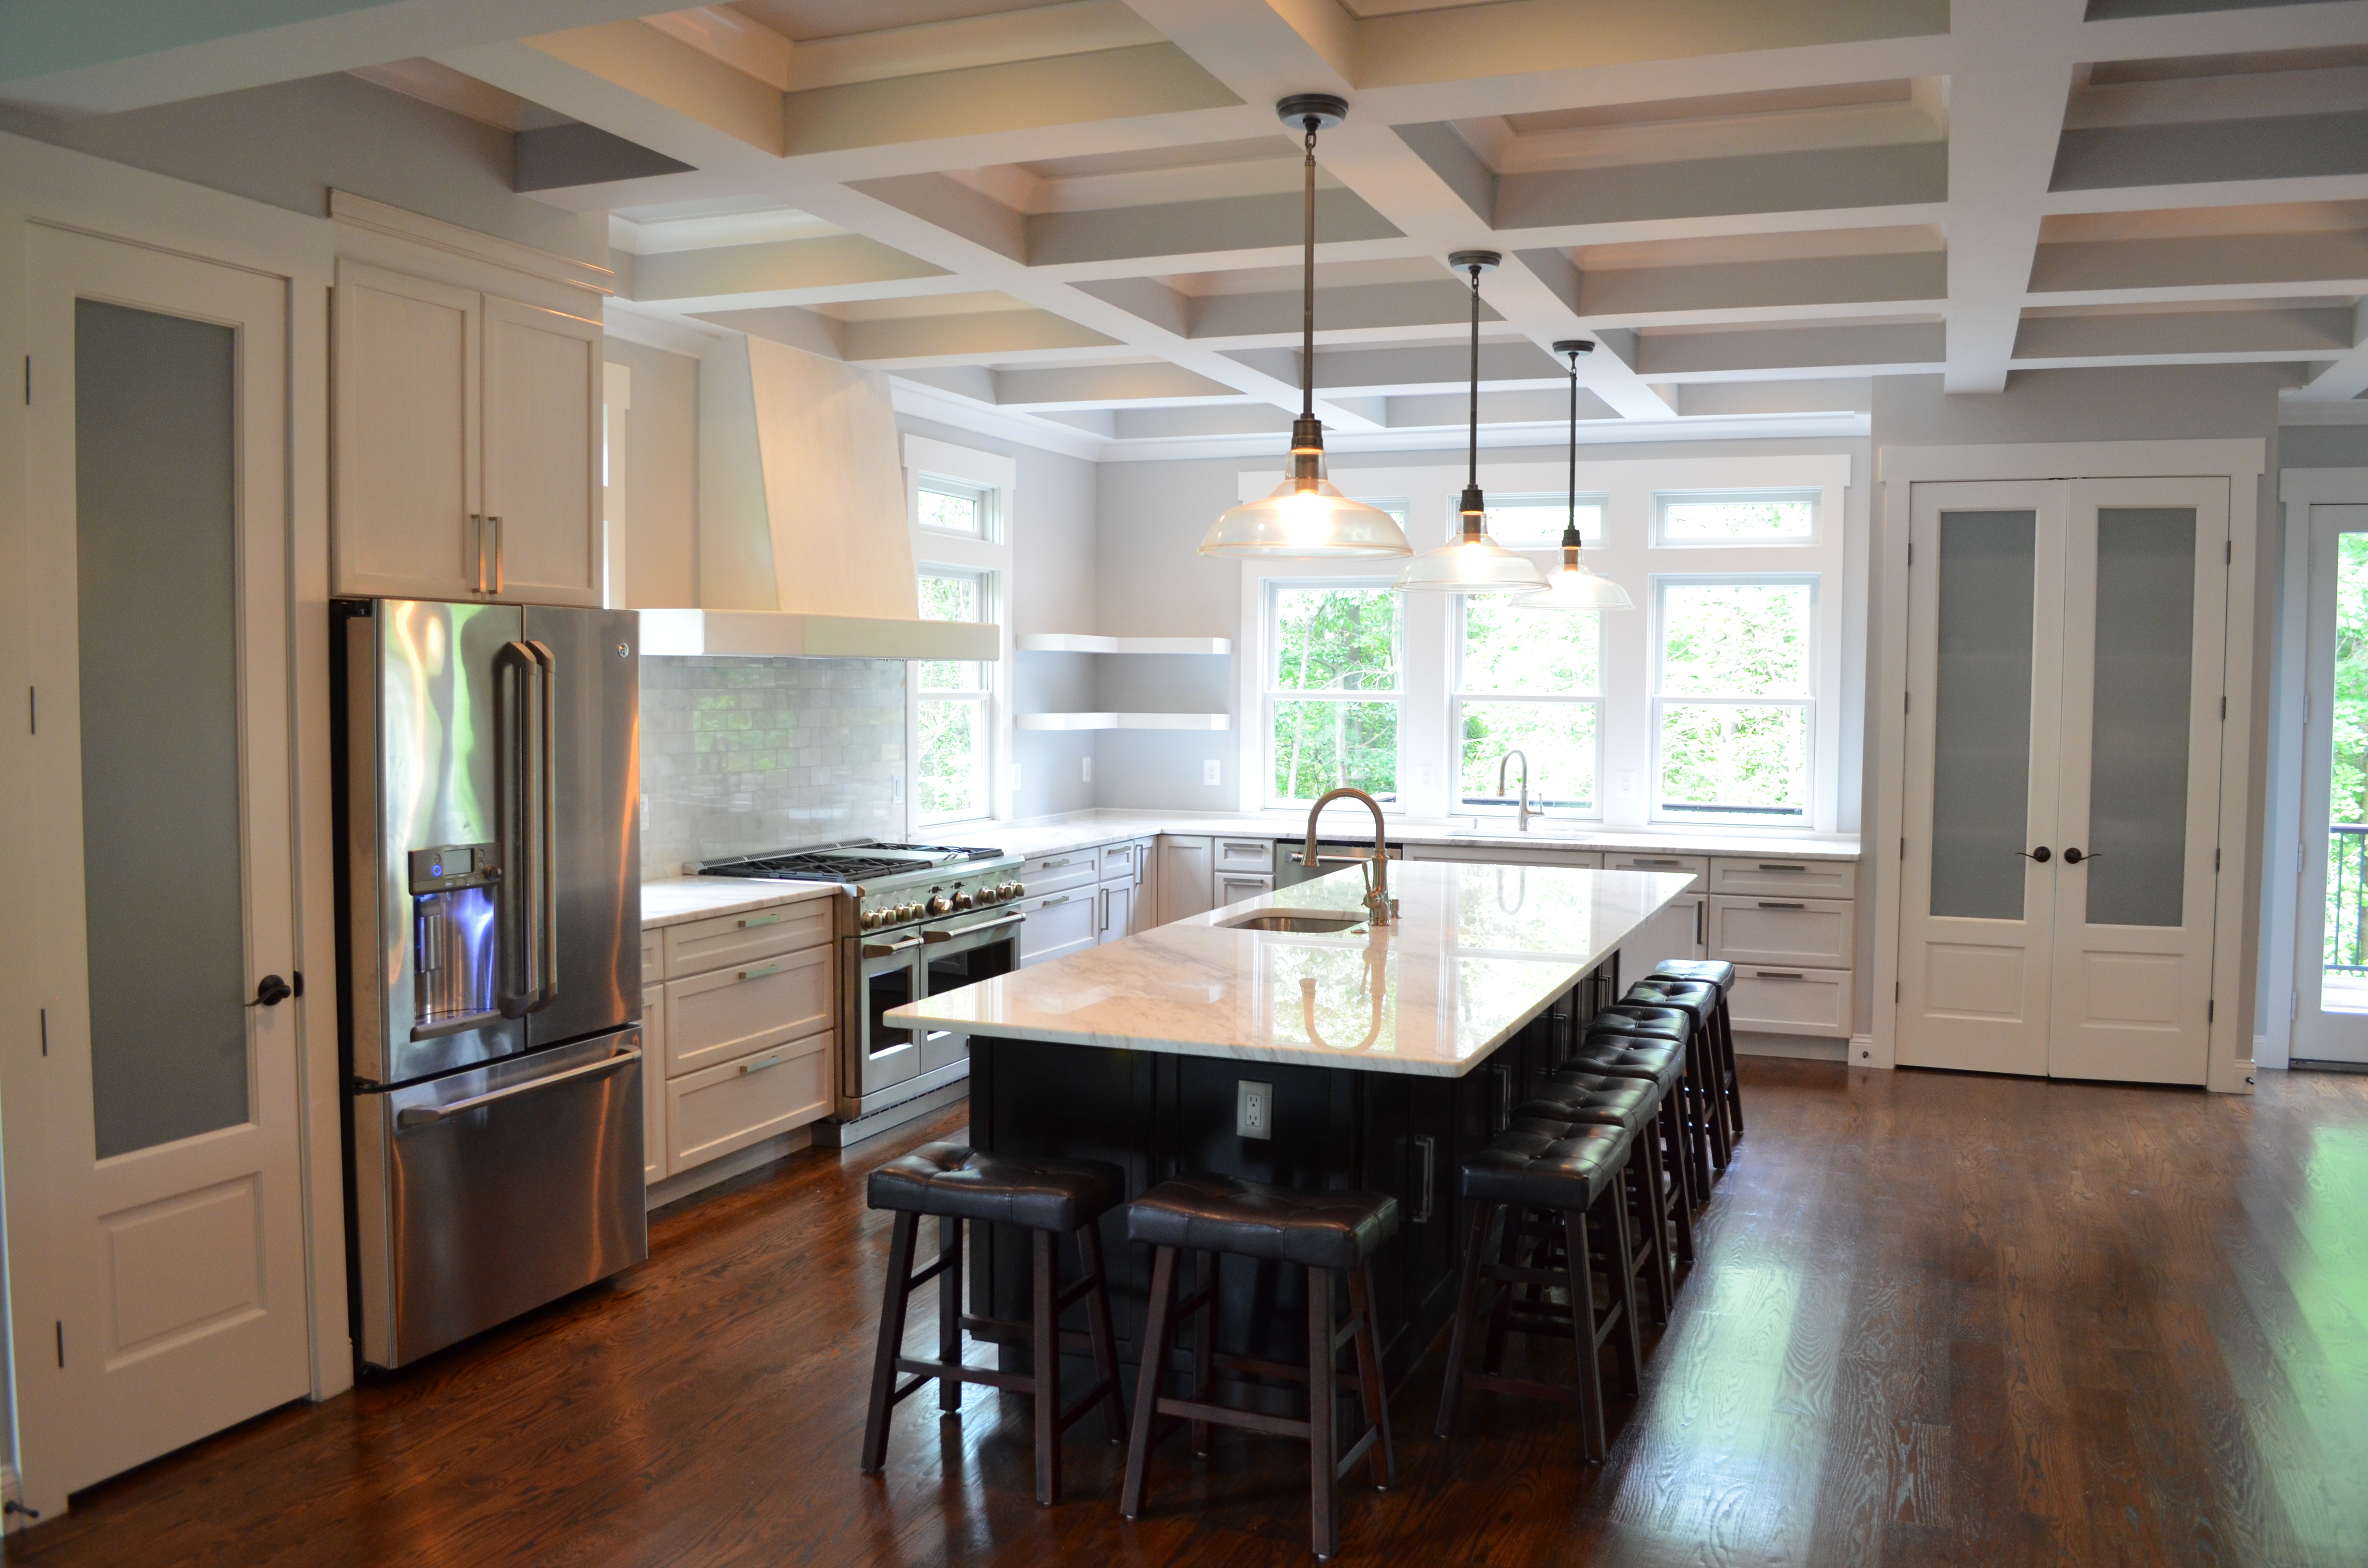 Kitchens With 10 Foot Ceilings / Pendant above island with 8 foot 10 Ft Ceiling Vs 8 Ft Ceiling